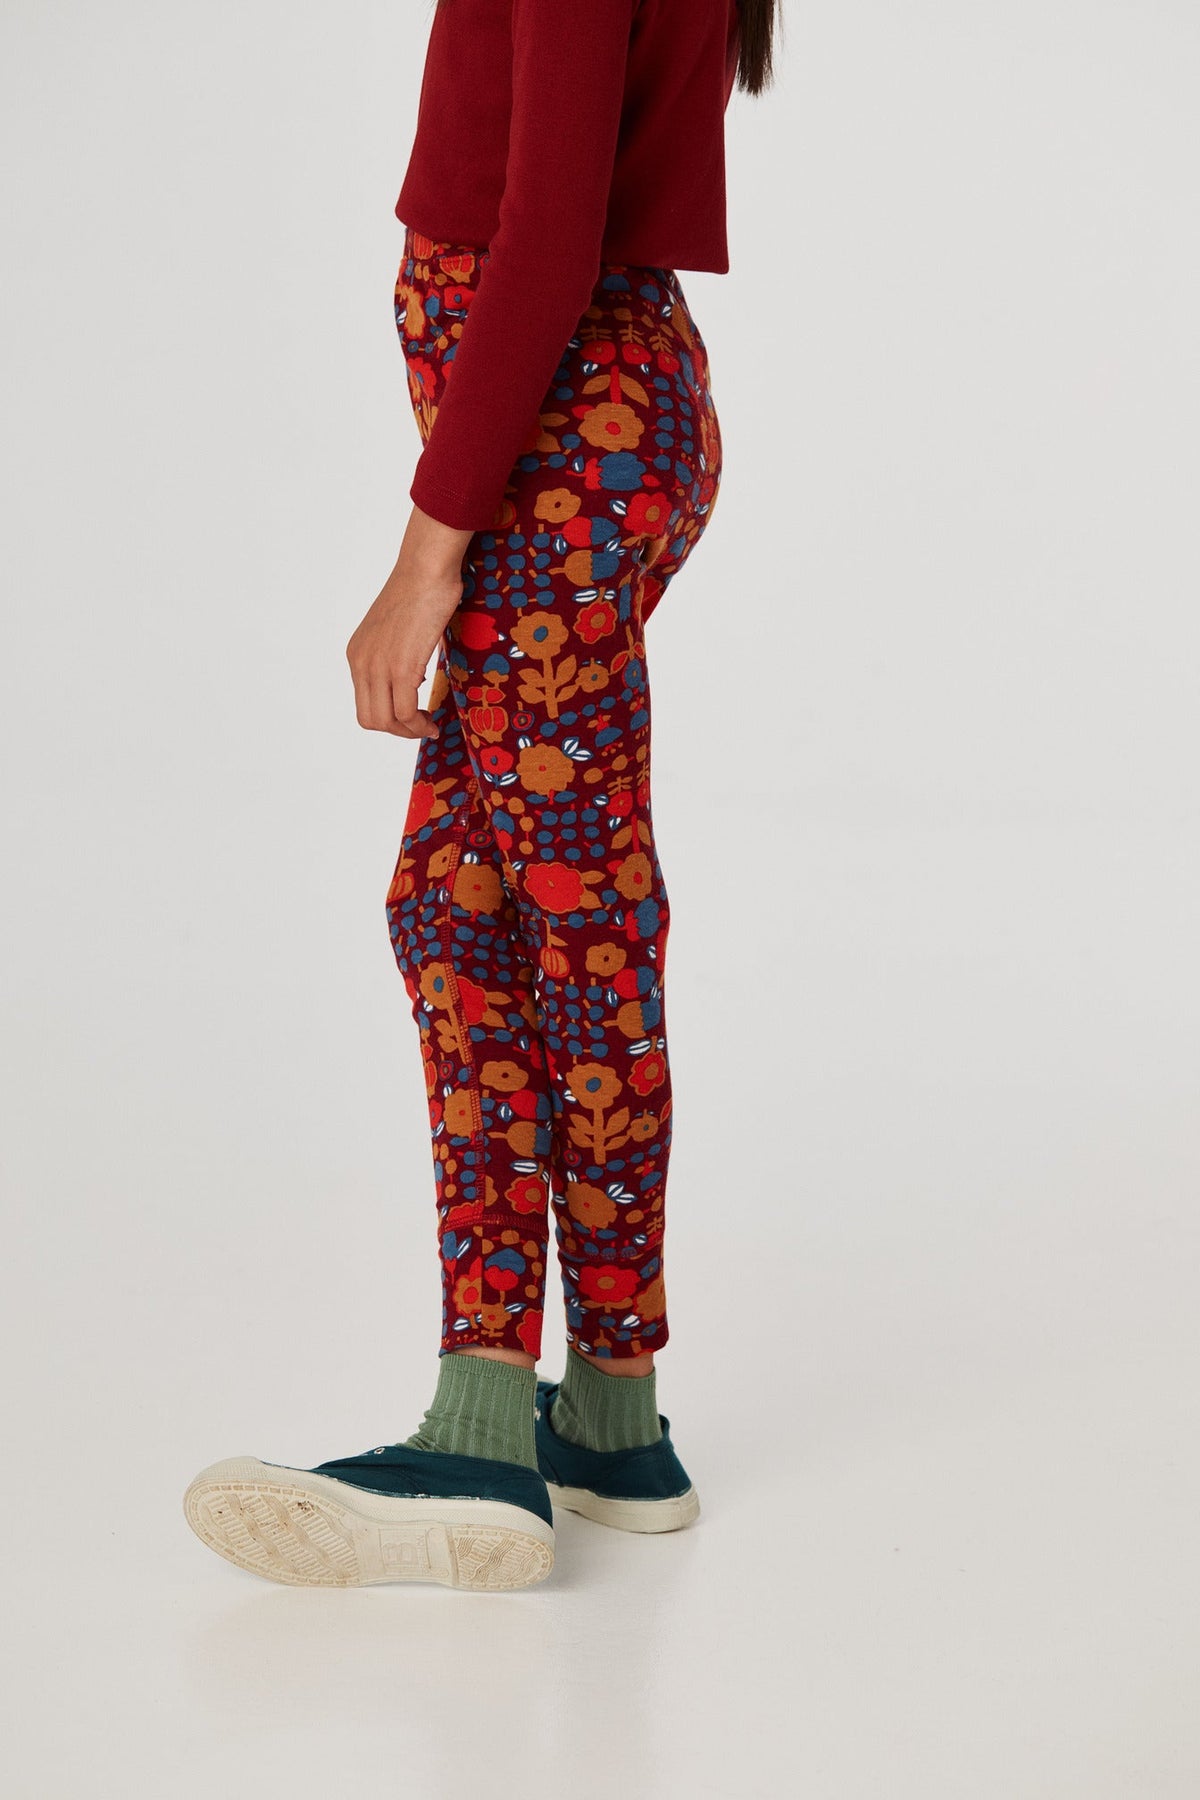 Legging with Rib Cuff - Cranberry Playground+Model is 51 inches tall, 53lbs, wearing a size 7-8y